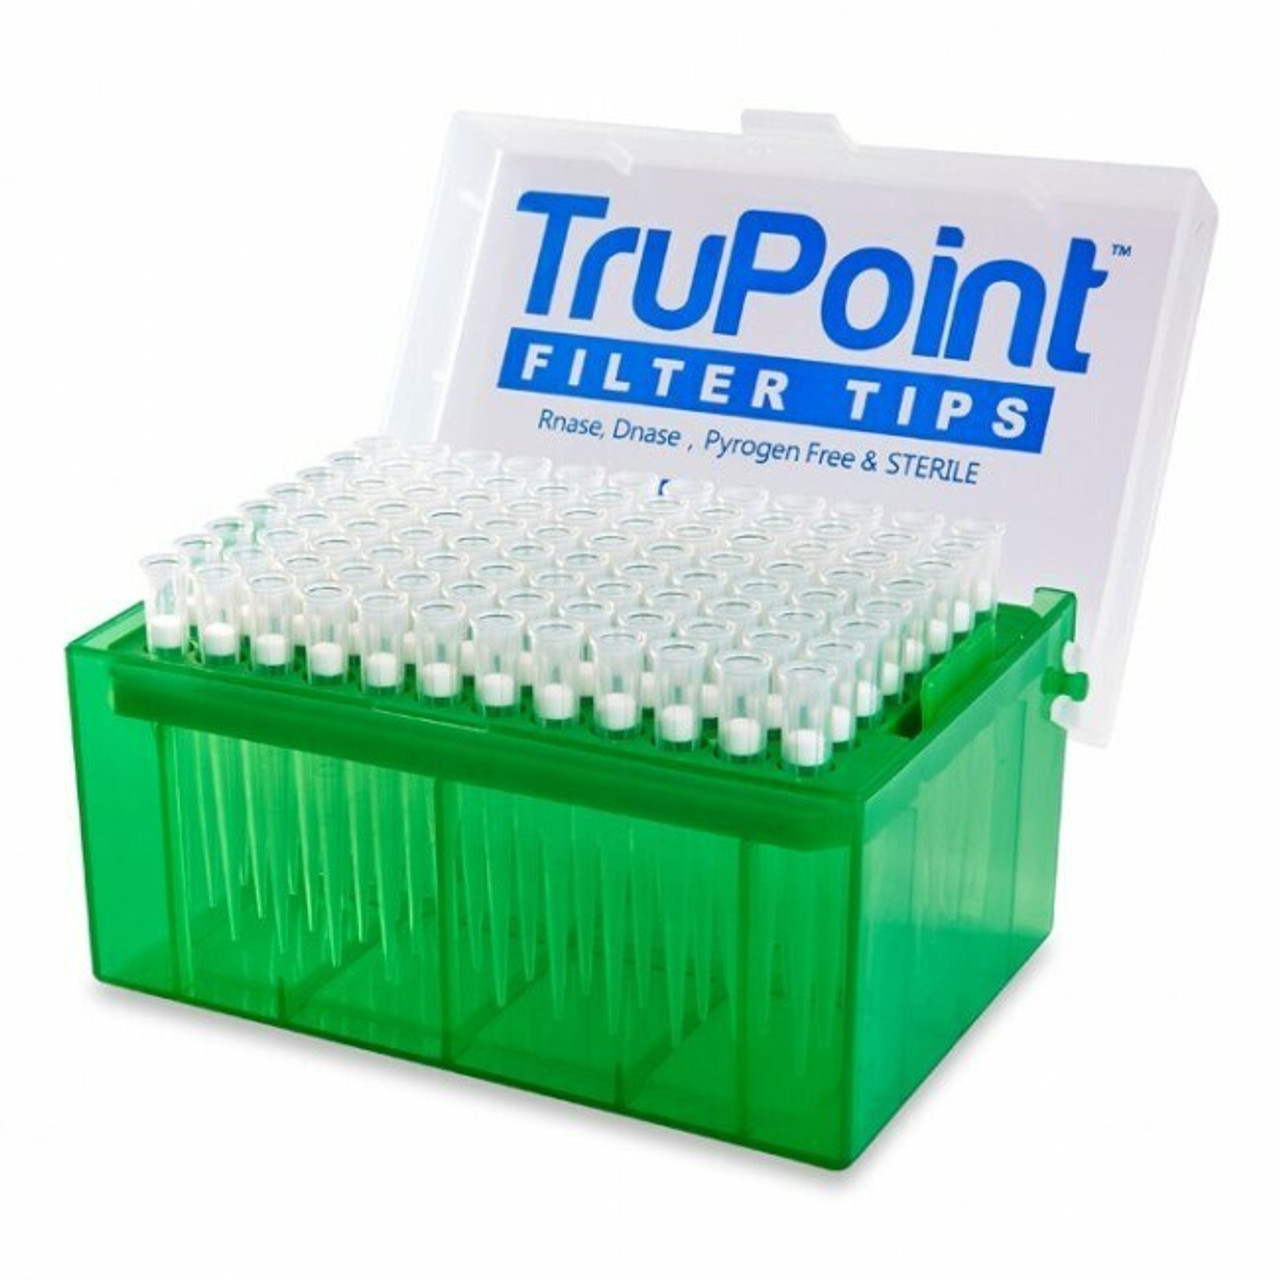 Pepette Filter Tips 100 ul